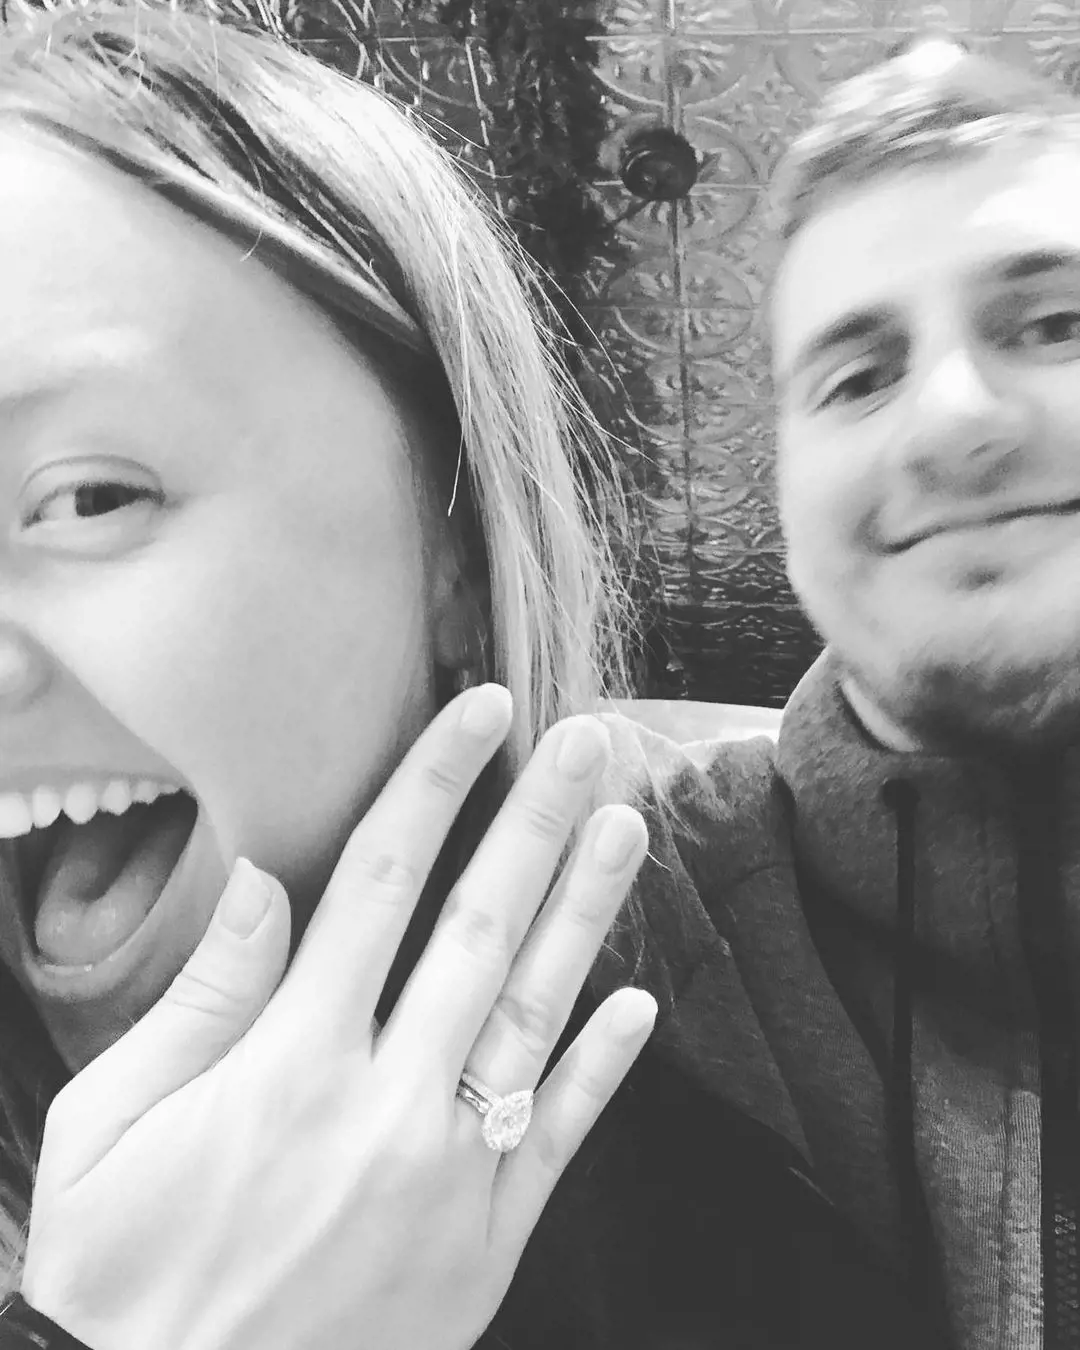 Jokic and his gf flaunting her rings.